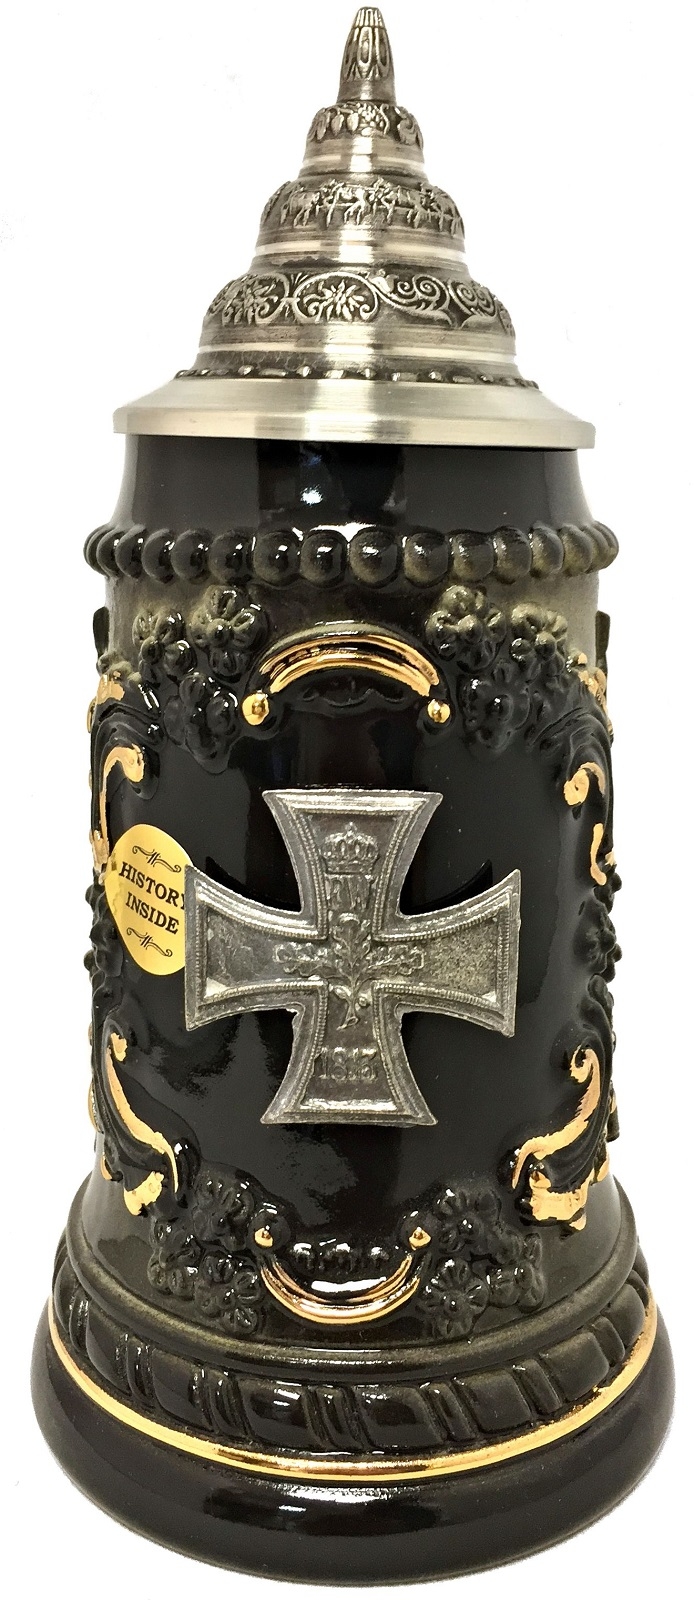 Pewter Iron Cross Military Decoration German Beer Stein .25 L Made in Germany